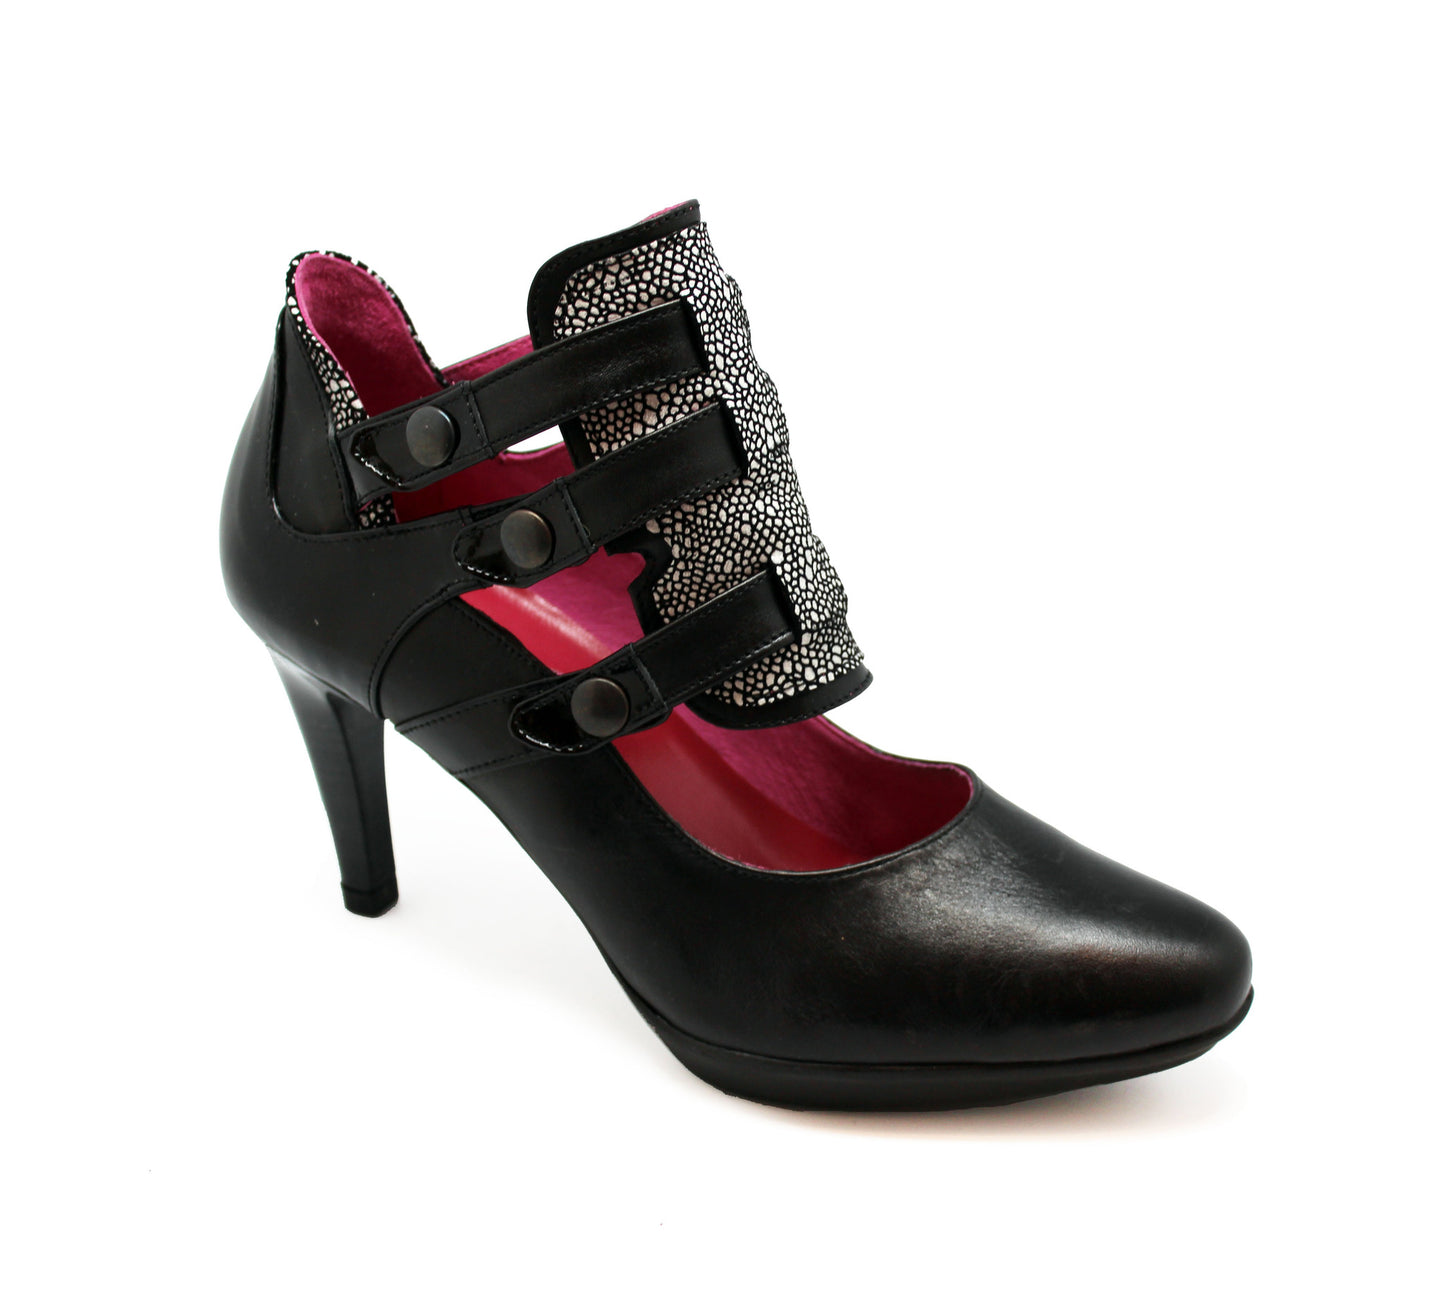 Leather high heel with removable instep panel. Rubber in-sole gives comfort and grip. 